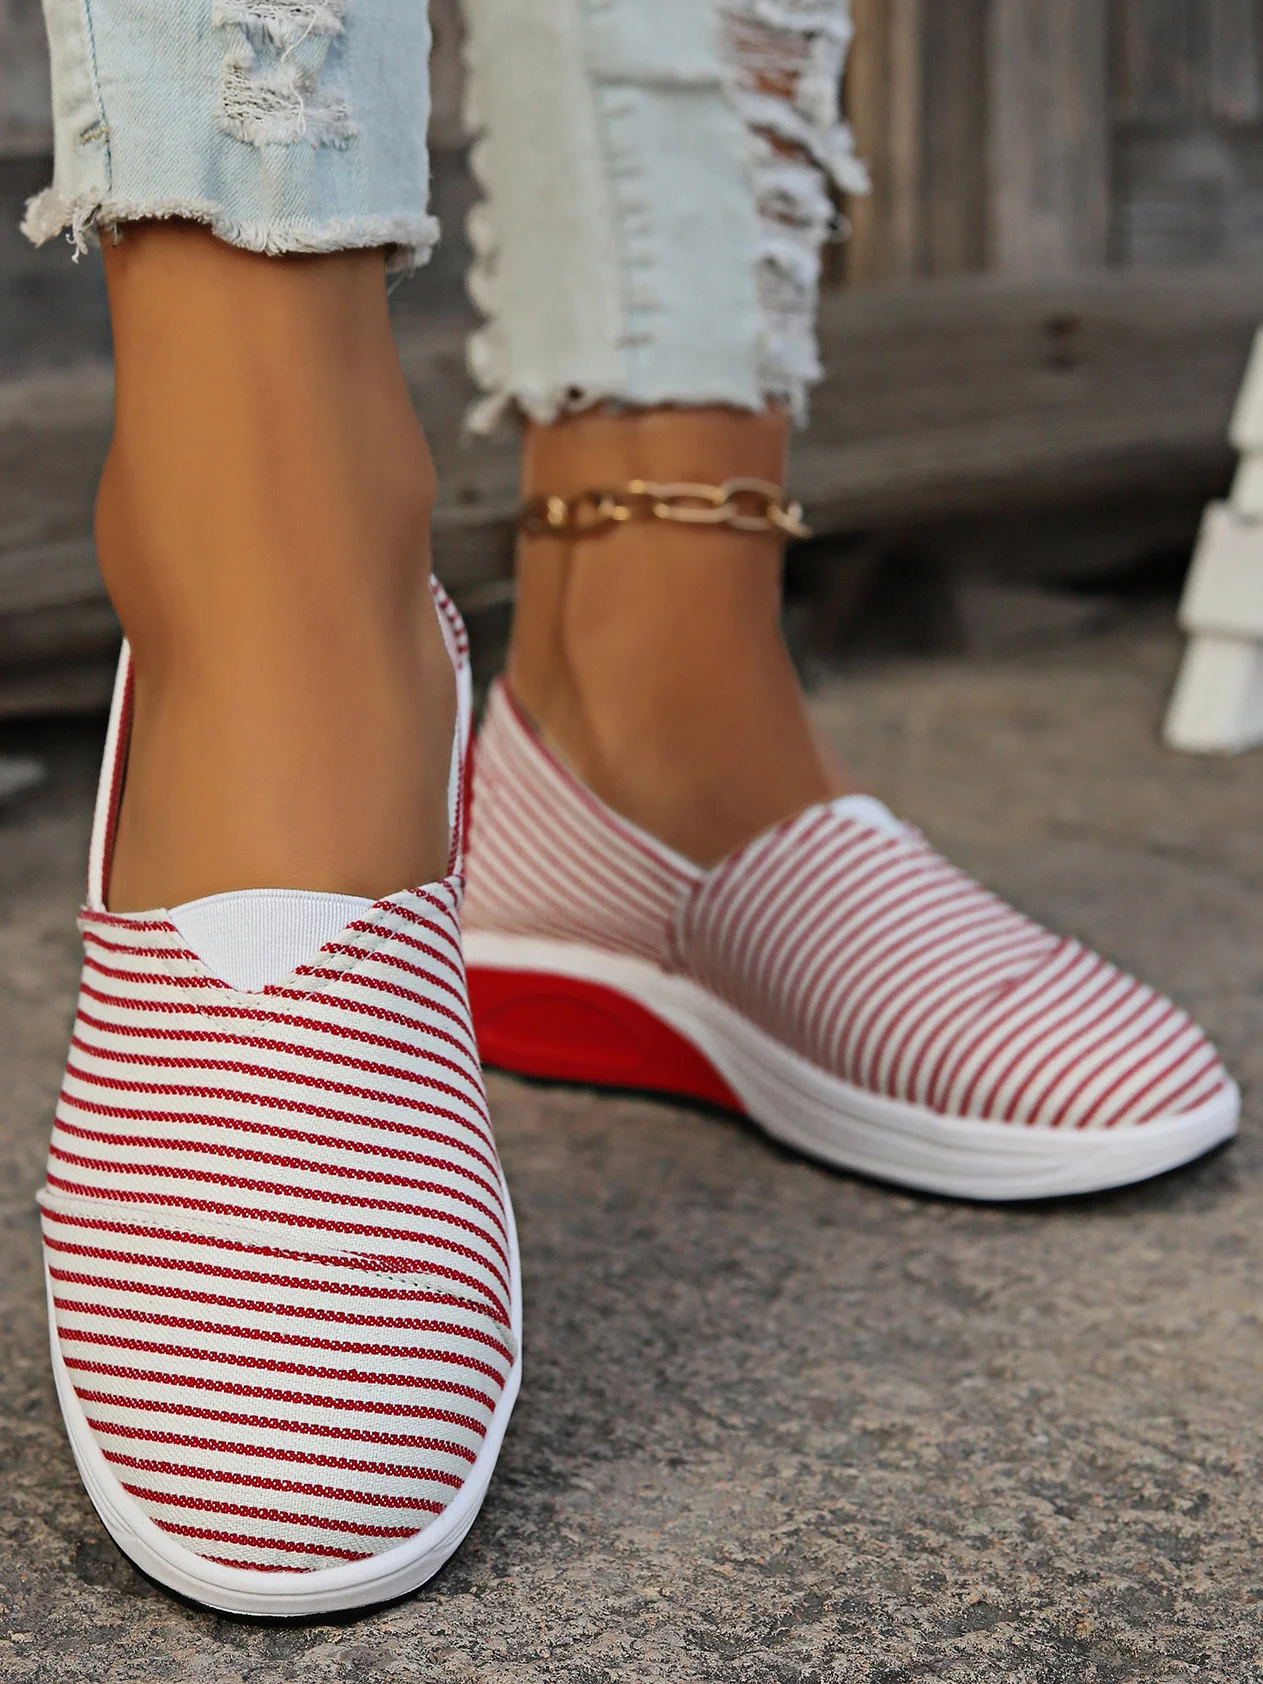 America Flag Fabric Casual Wedge Heel Shallow Shoes